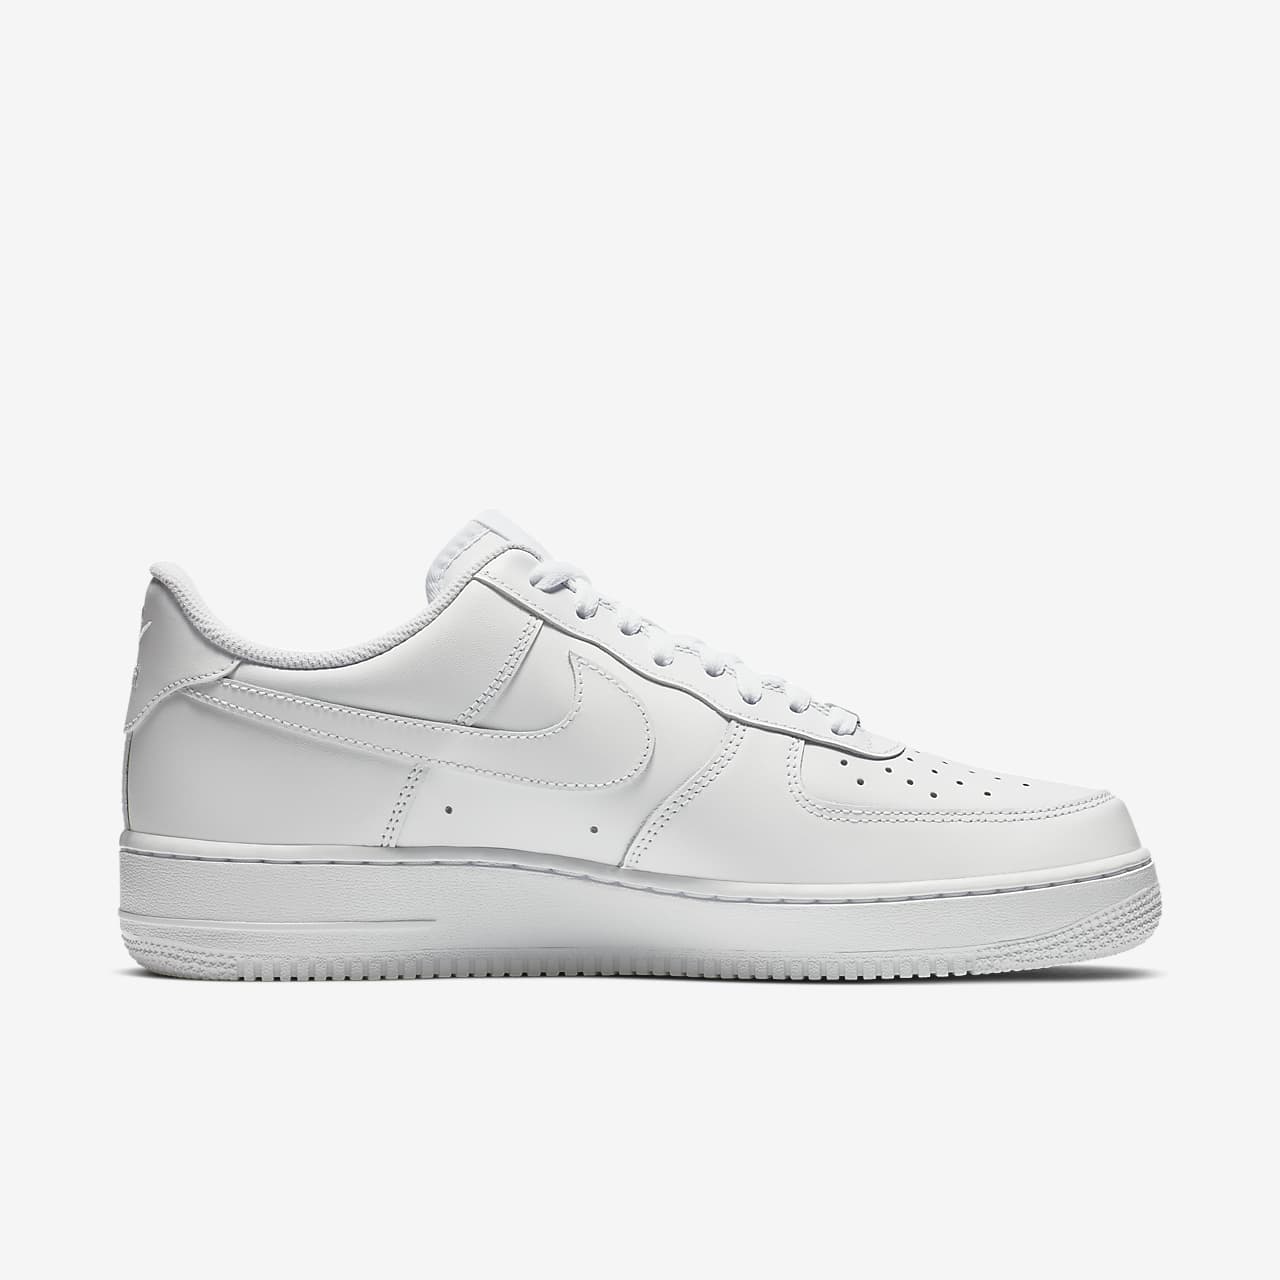 nike men's air force one low white